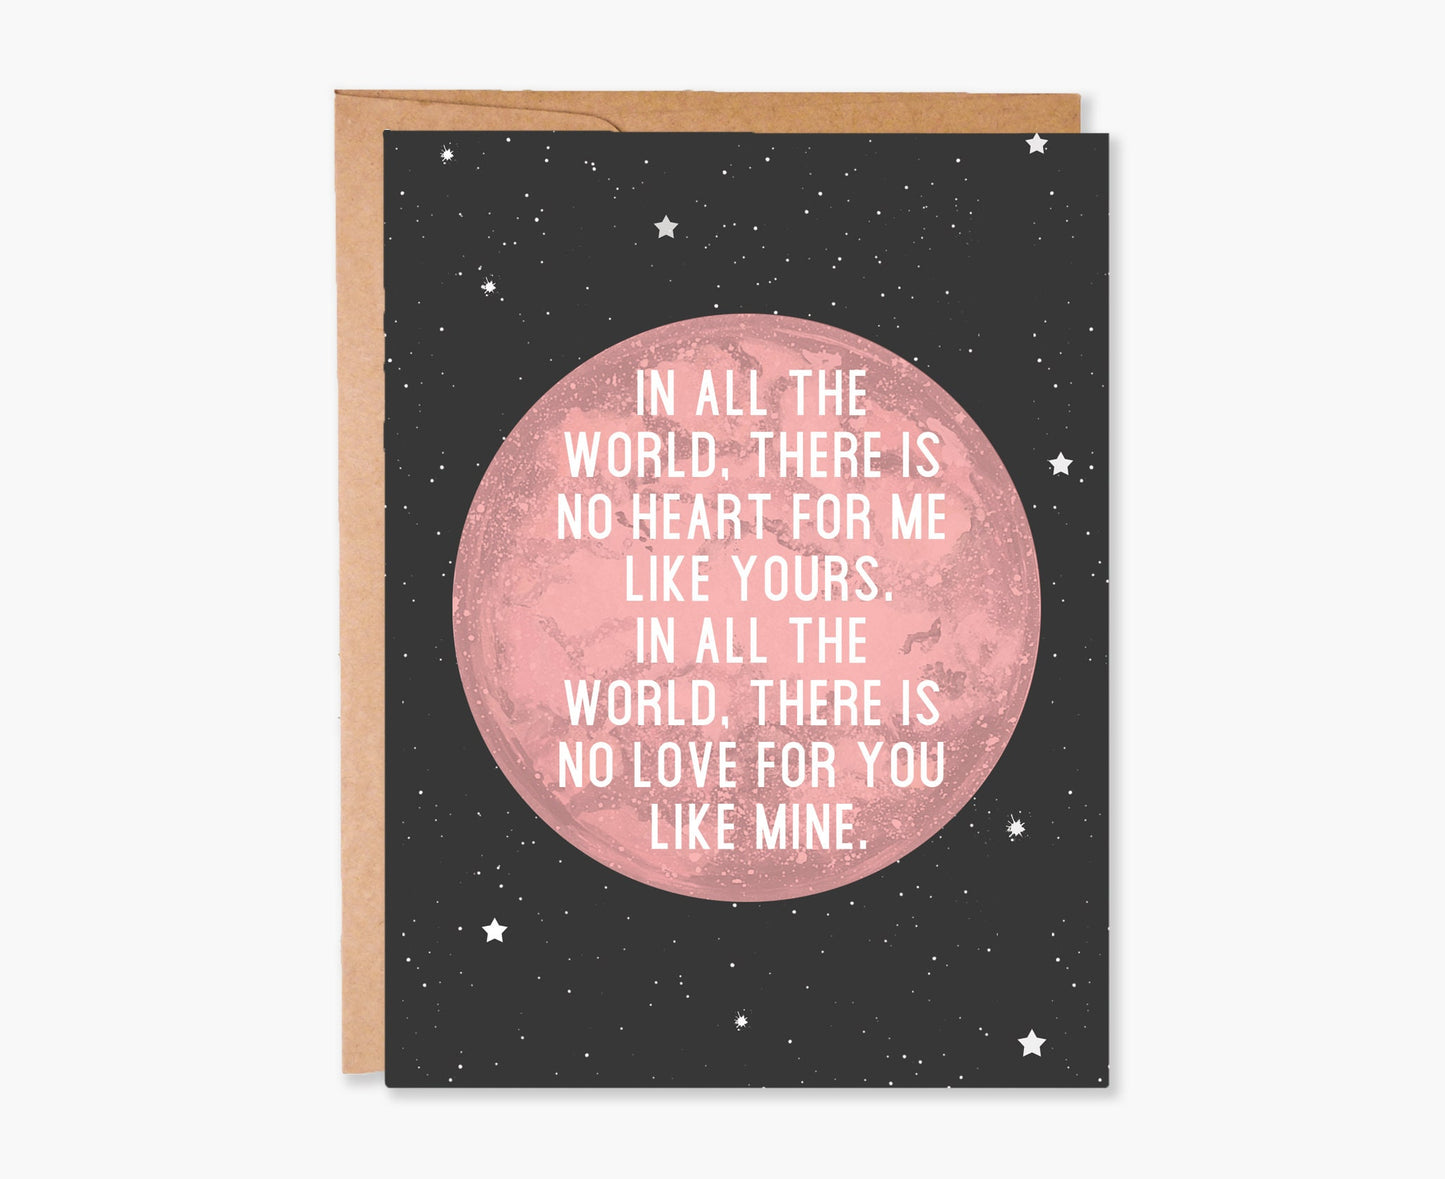 Valentines Card, Valentine Card for Boyfriend, Anniversary Card, Card for Husband, Card for Wife, Romantic Card, Item Code - COTC L25